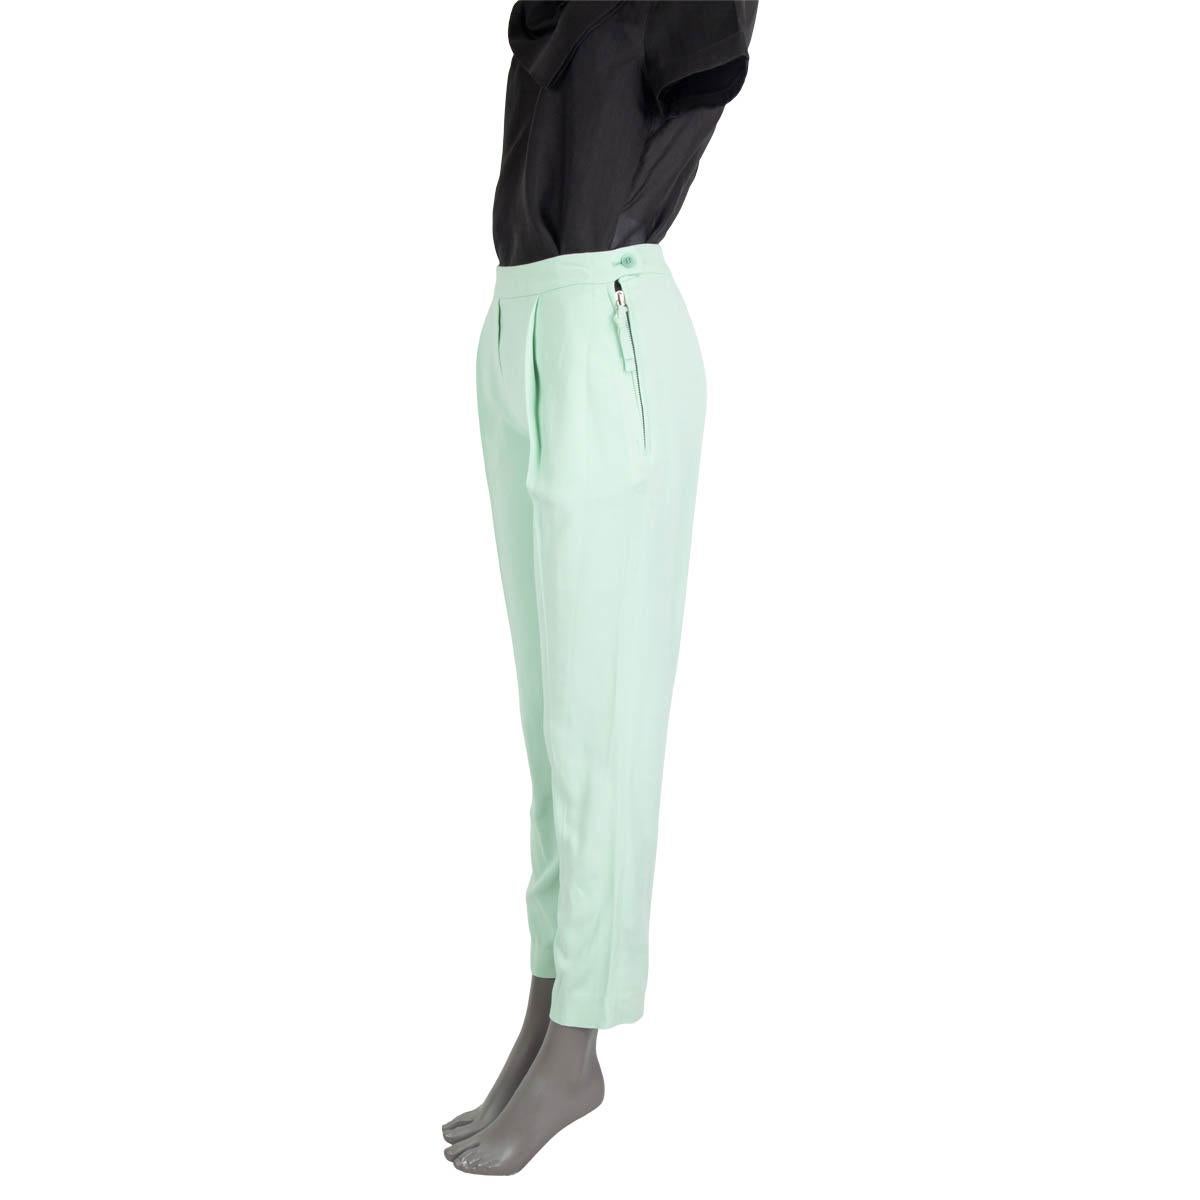 100% authentic Ermanno Scervino pleated pants in mint viscose (97%) and elastane (3%). Opens with a concealed zipper and a button on the side. Unlined. Have benn worn and are in excellent condition.

Measurements
Tag Size	40
Size	S
Waist	72cm